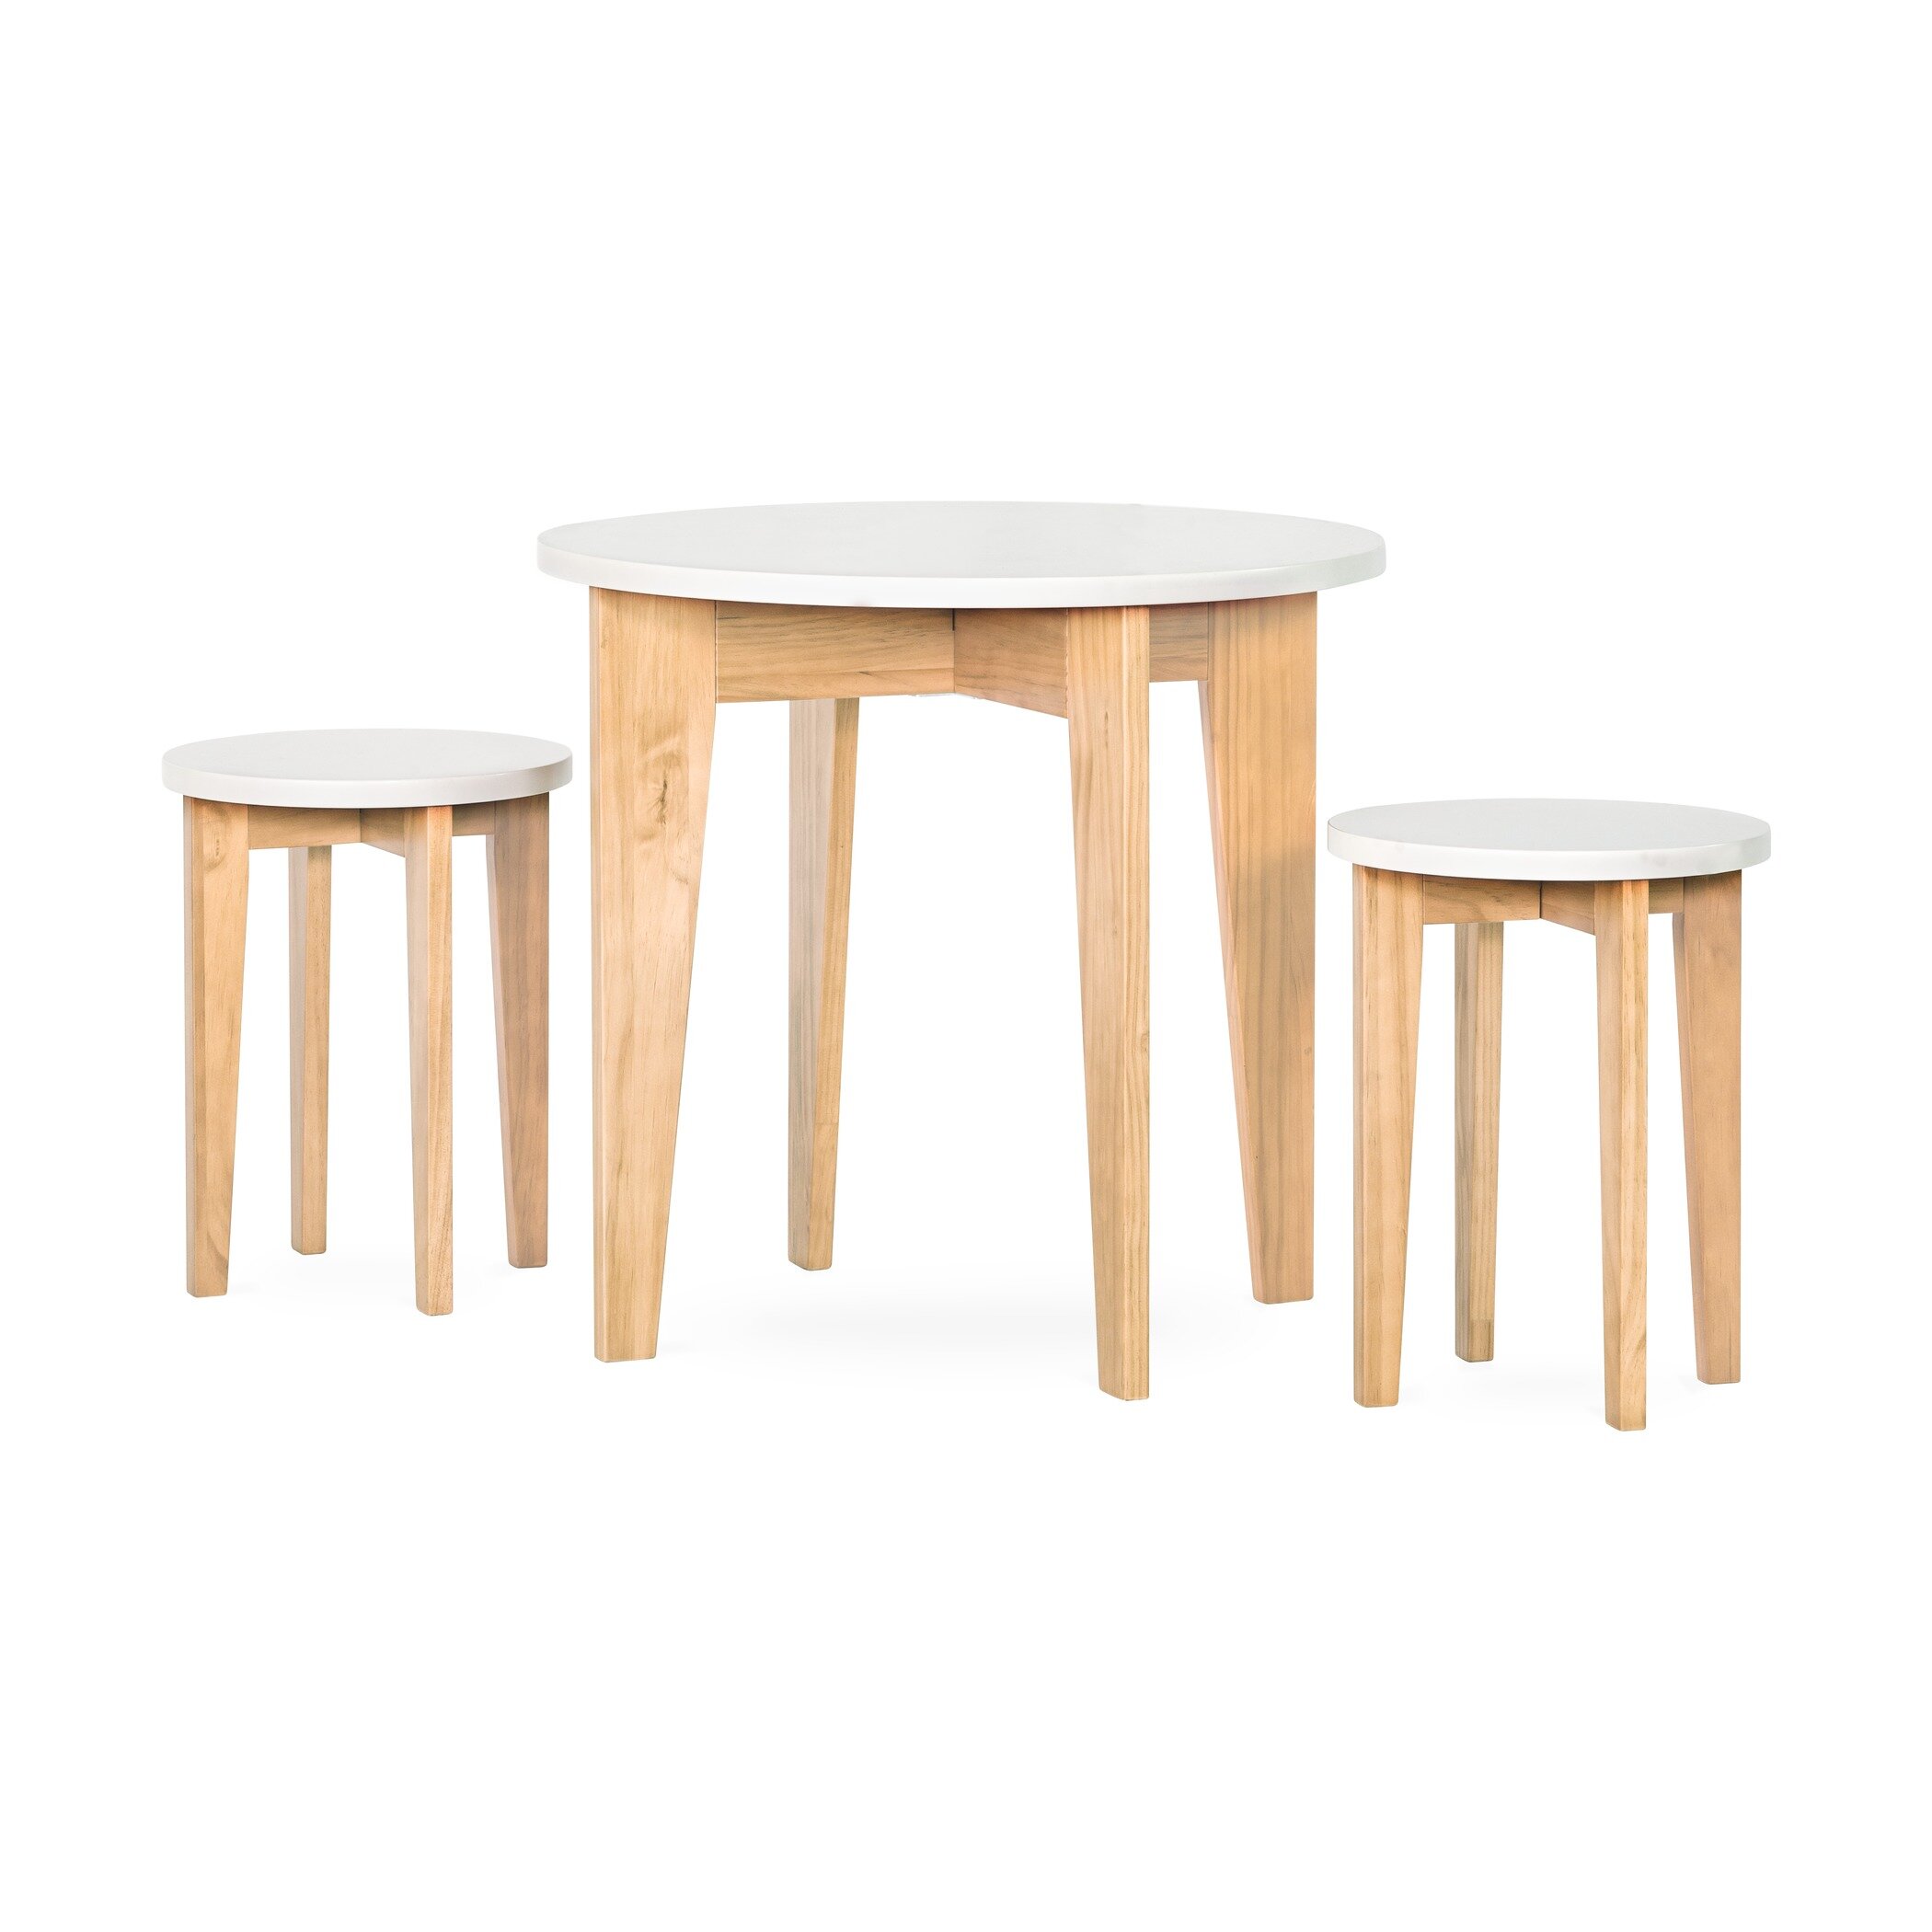 White Basics Kids Solid Wood Table and 2 Chairs Set 